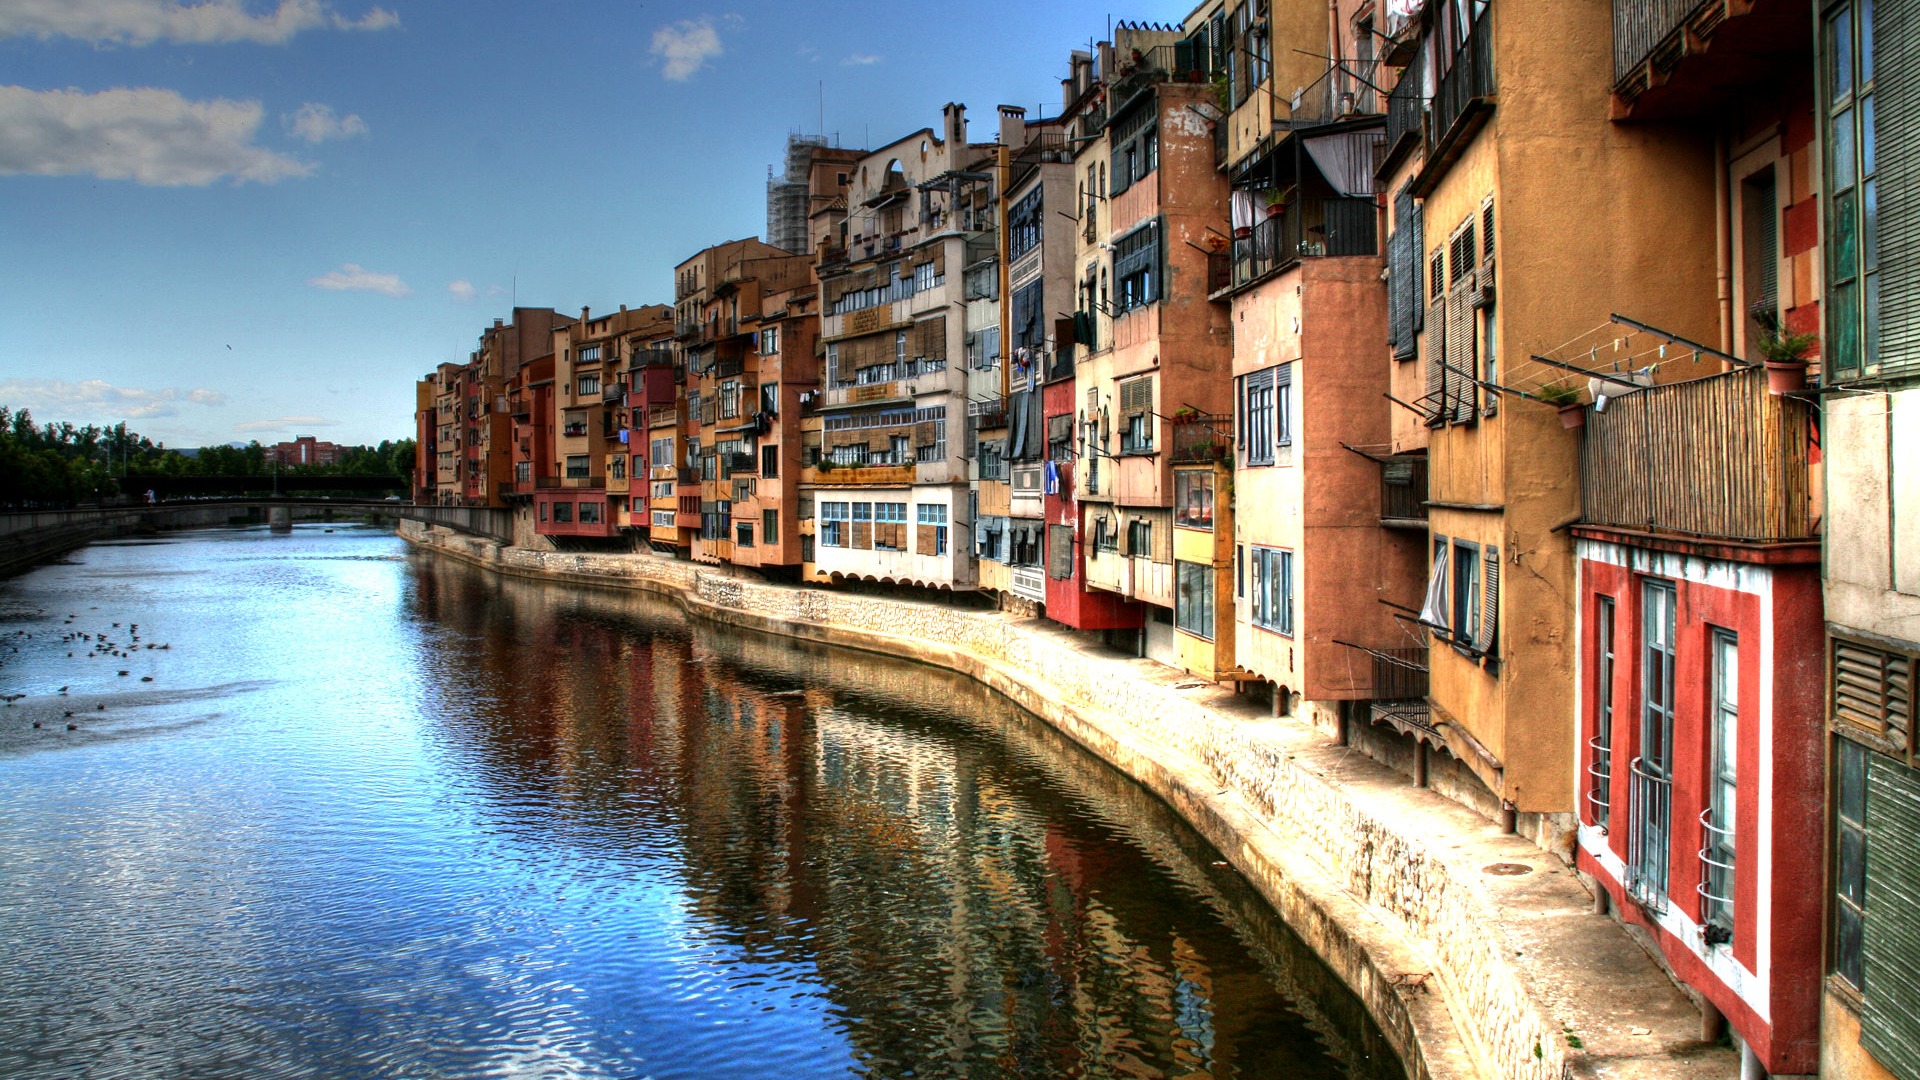 Espagne Girona HDR-style wallpapers #1 - 1920x1080